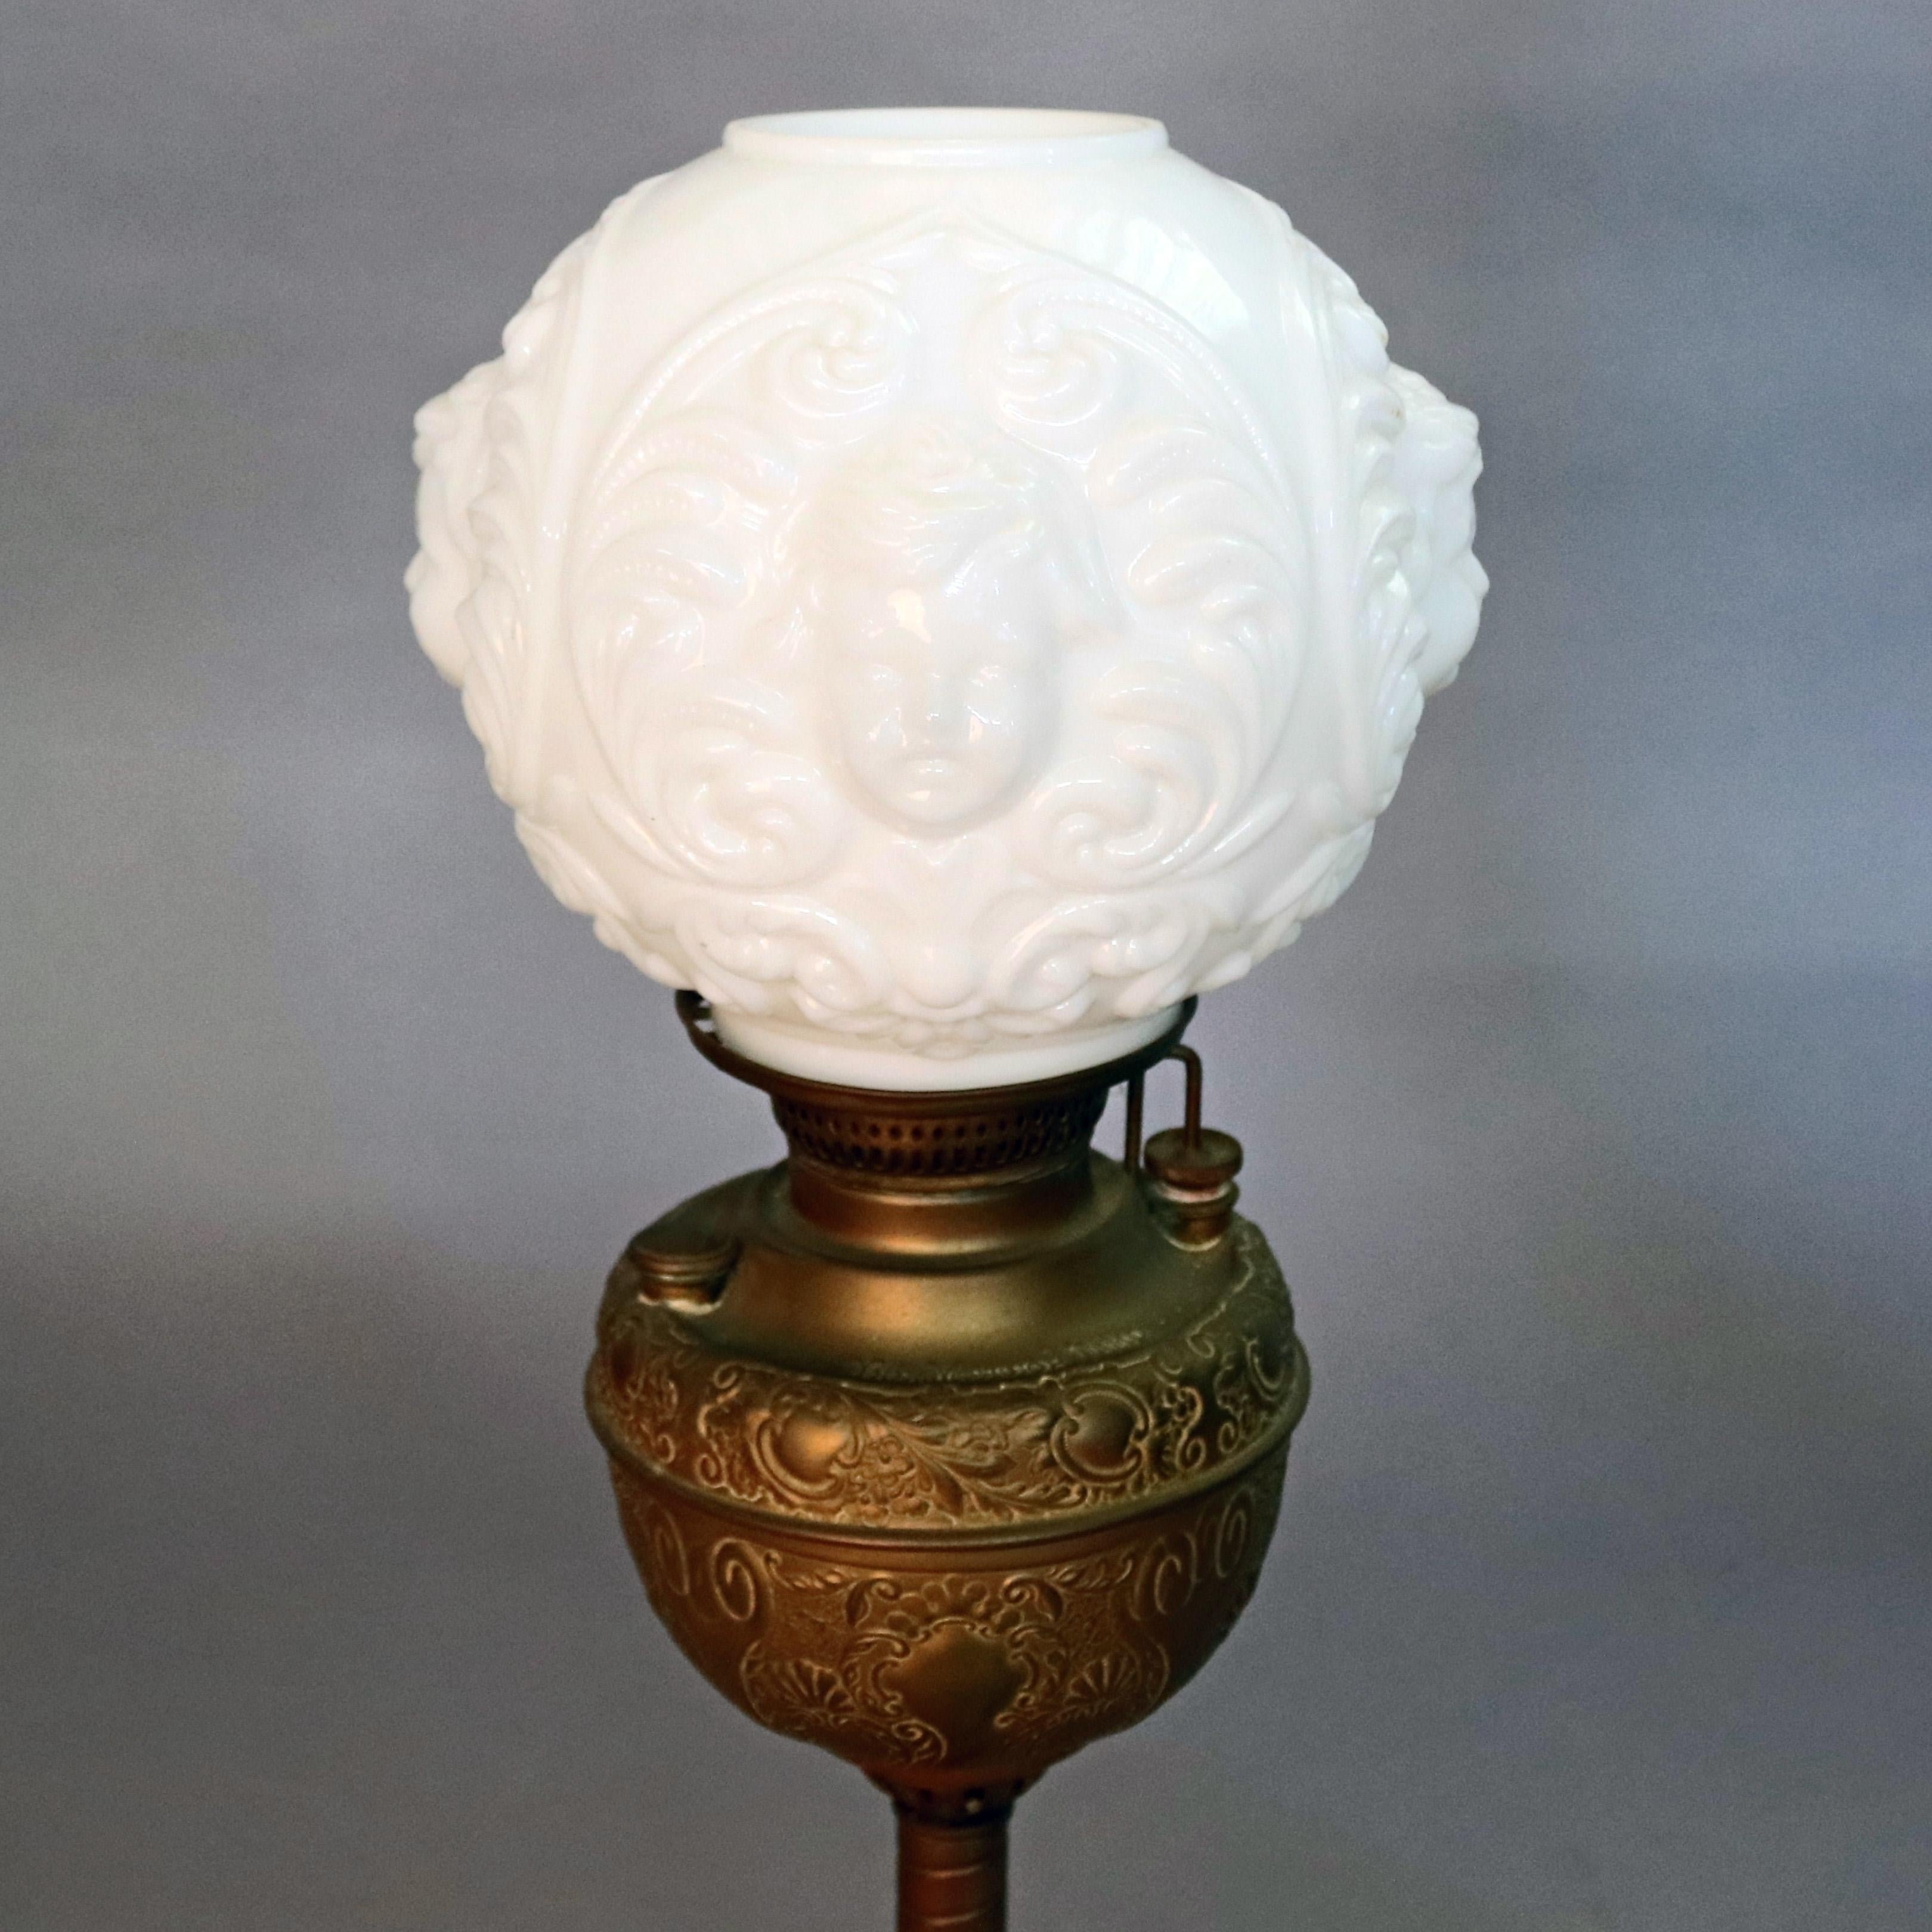 An antique Gone with the wind electrified oil lamp features scroll and foliate decorated font surmounting spiral shaft and seated on pierced foliate cast metal base and having blown out milk glass shade with cherub faces, circa 1890

Measures: